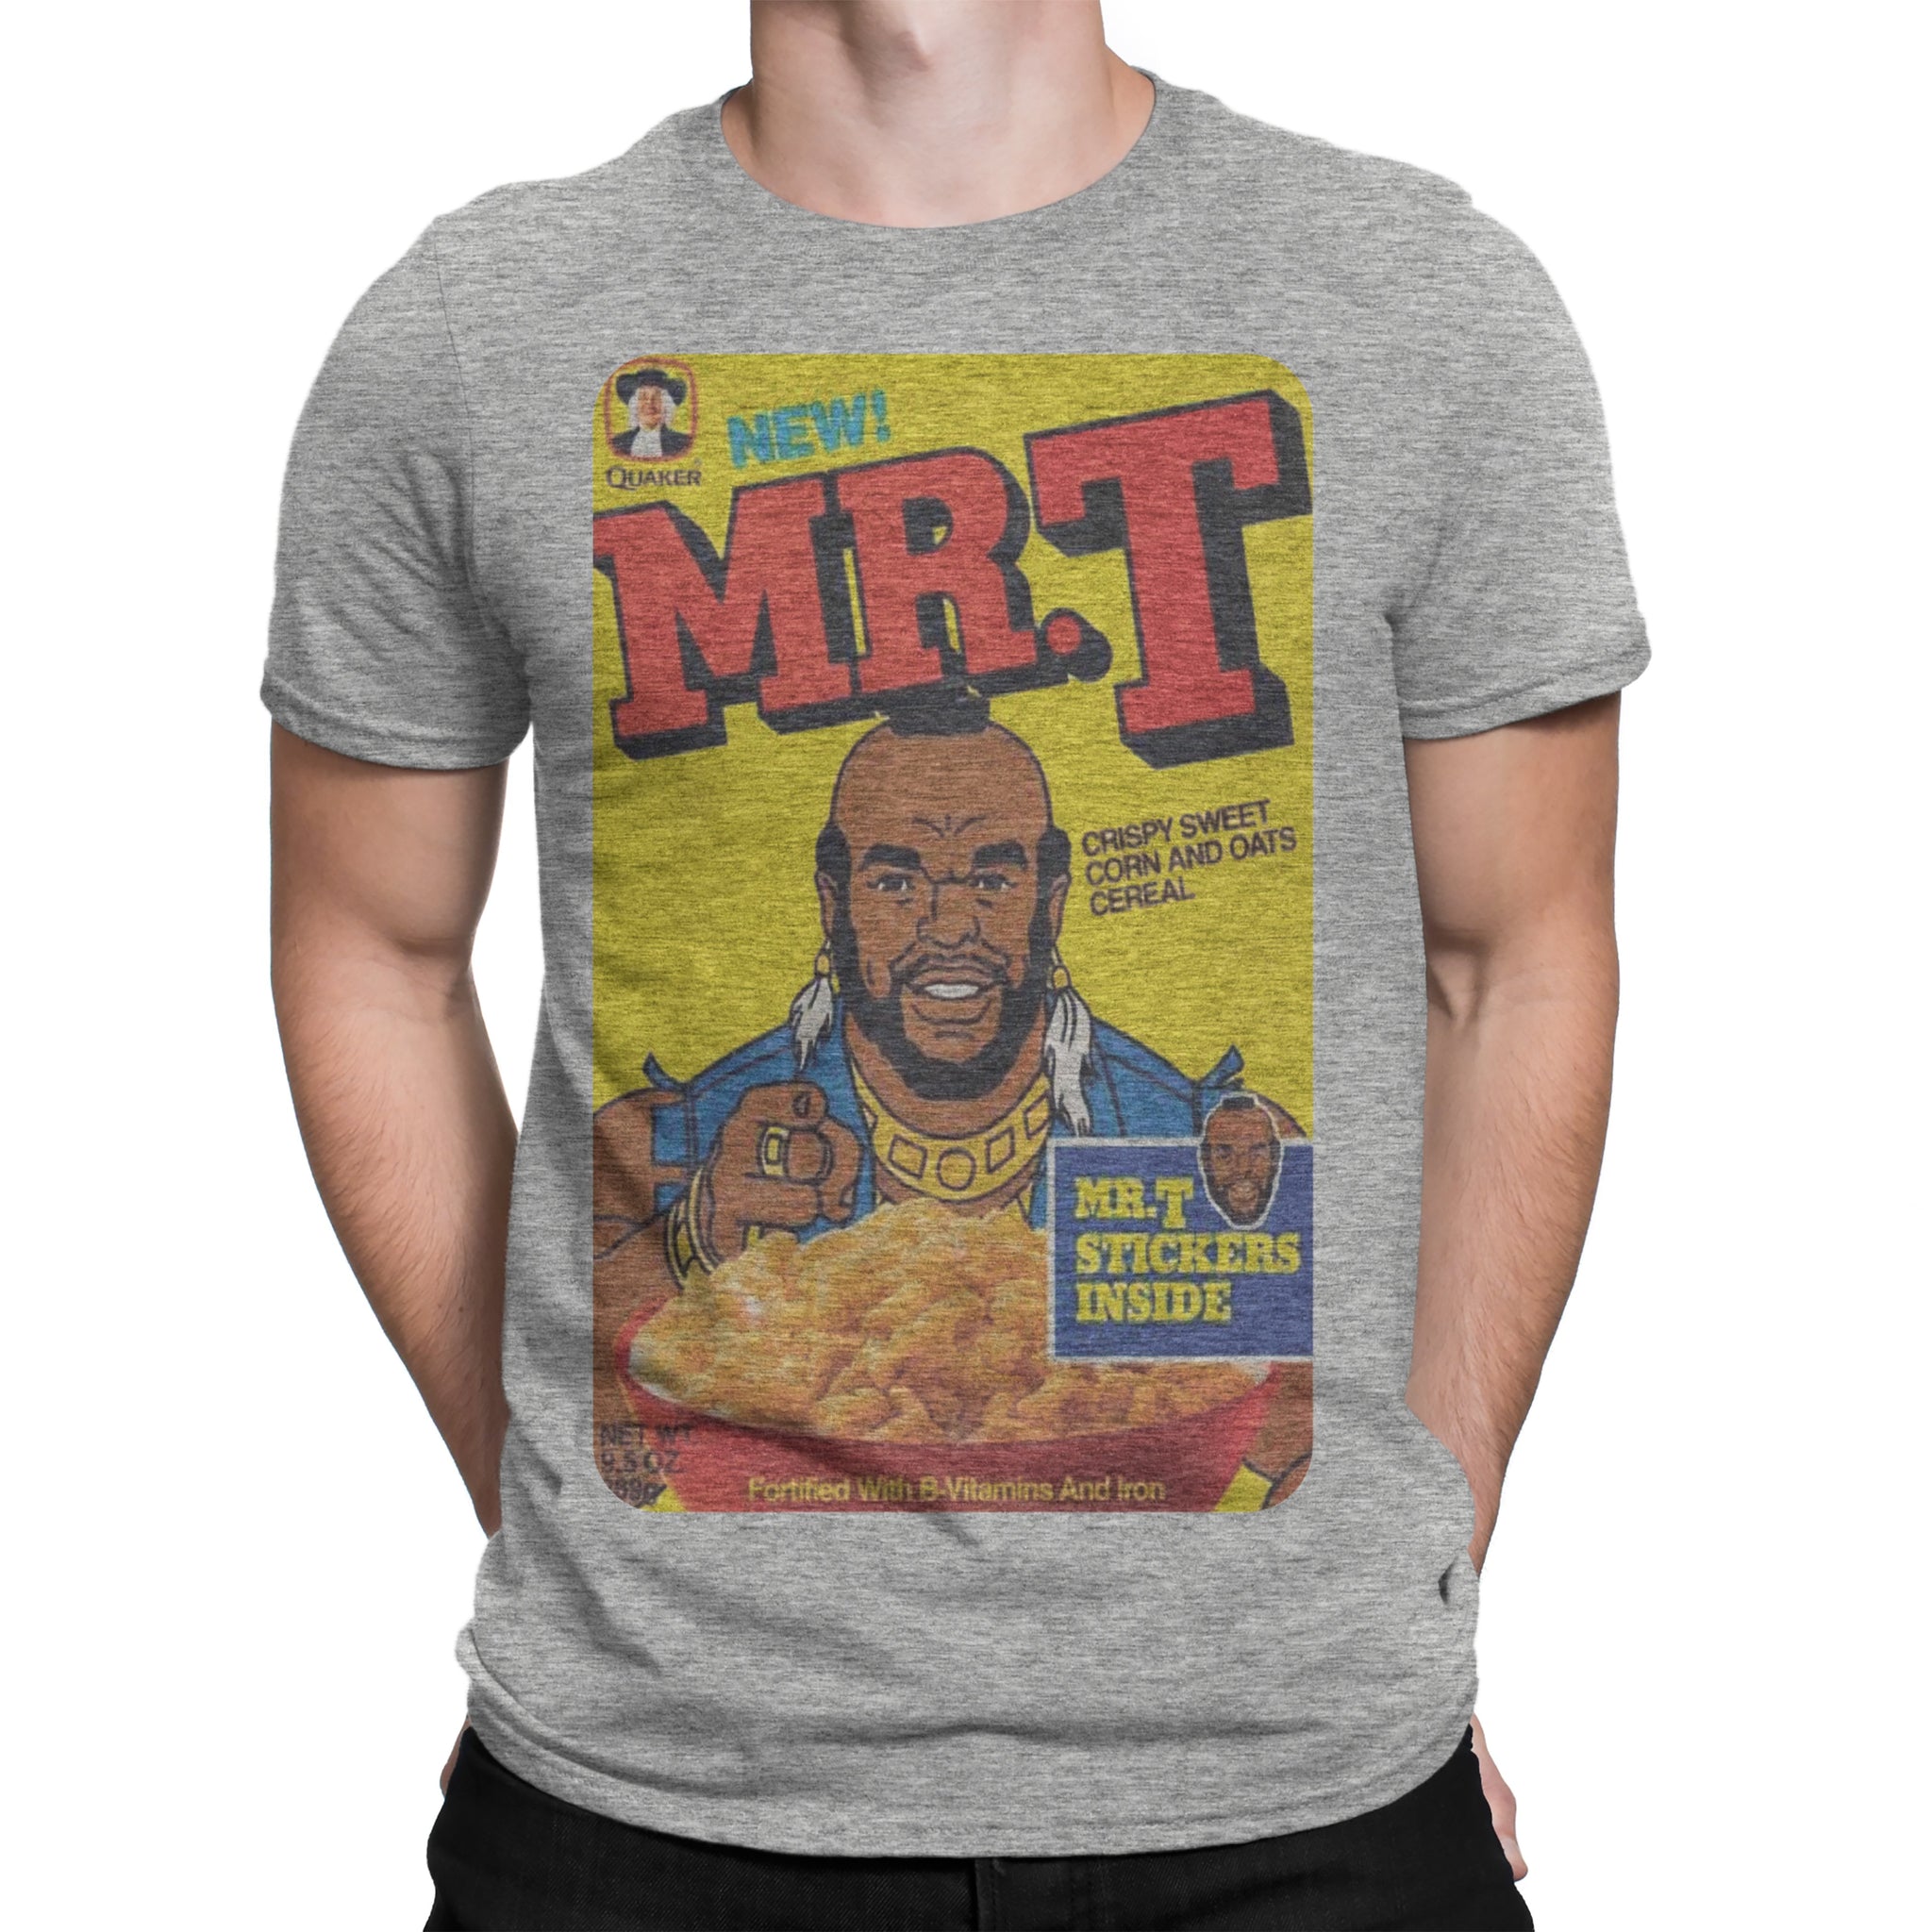 Mr. T "Cereal Box" Tee